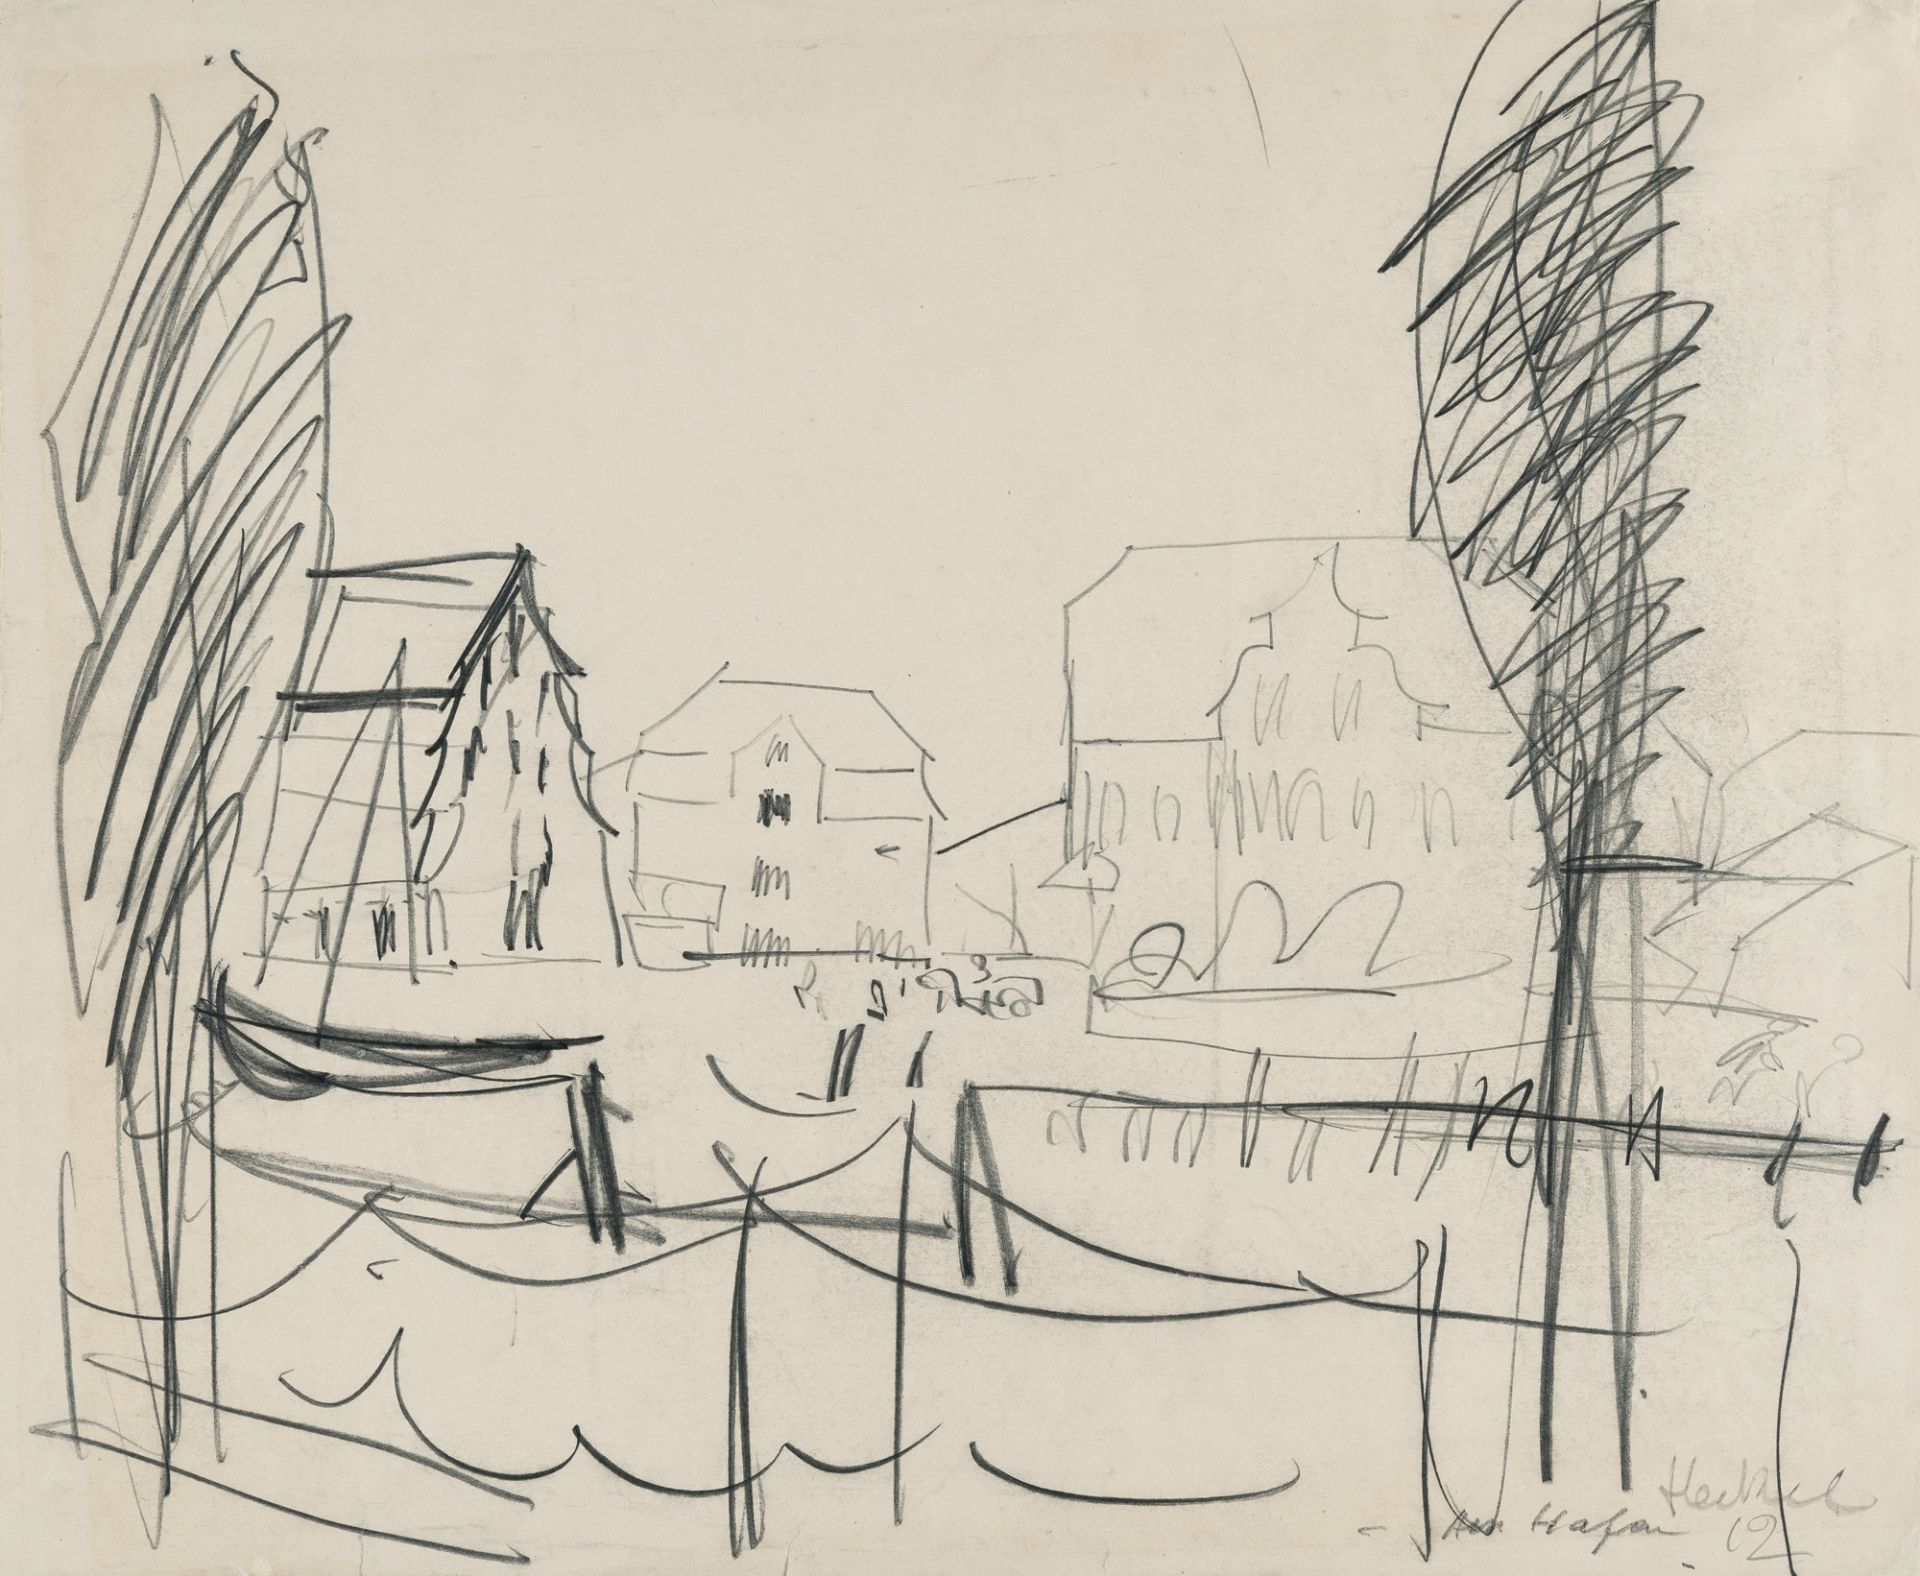 Erich Heckel, „Am Hafen“ (At the harbour).Pencil on cream wove. (19)22. Ca. 37 x 44.5 cm. Signed,